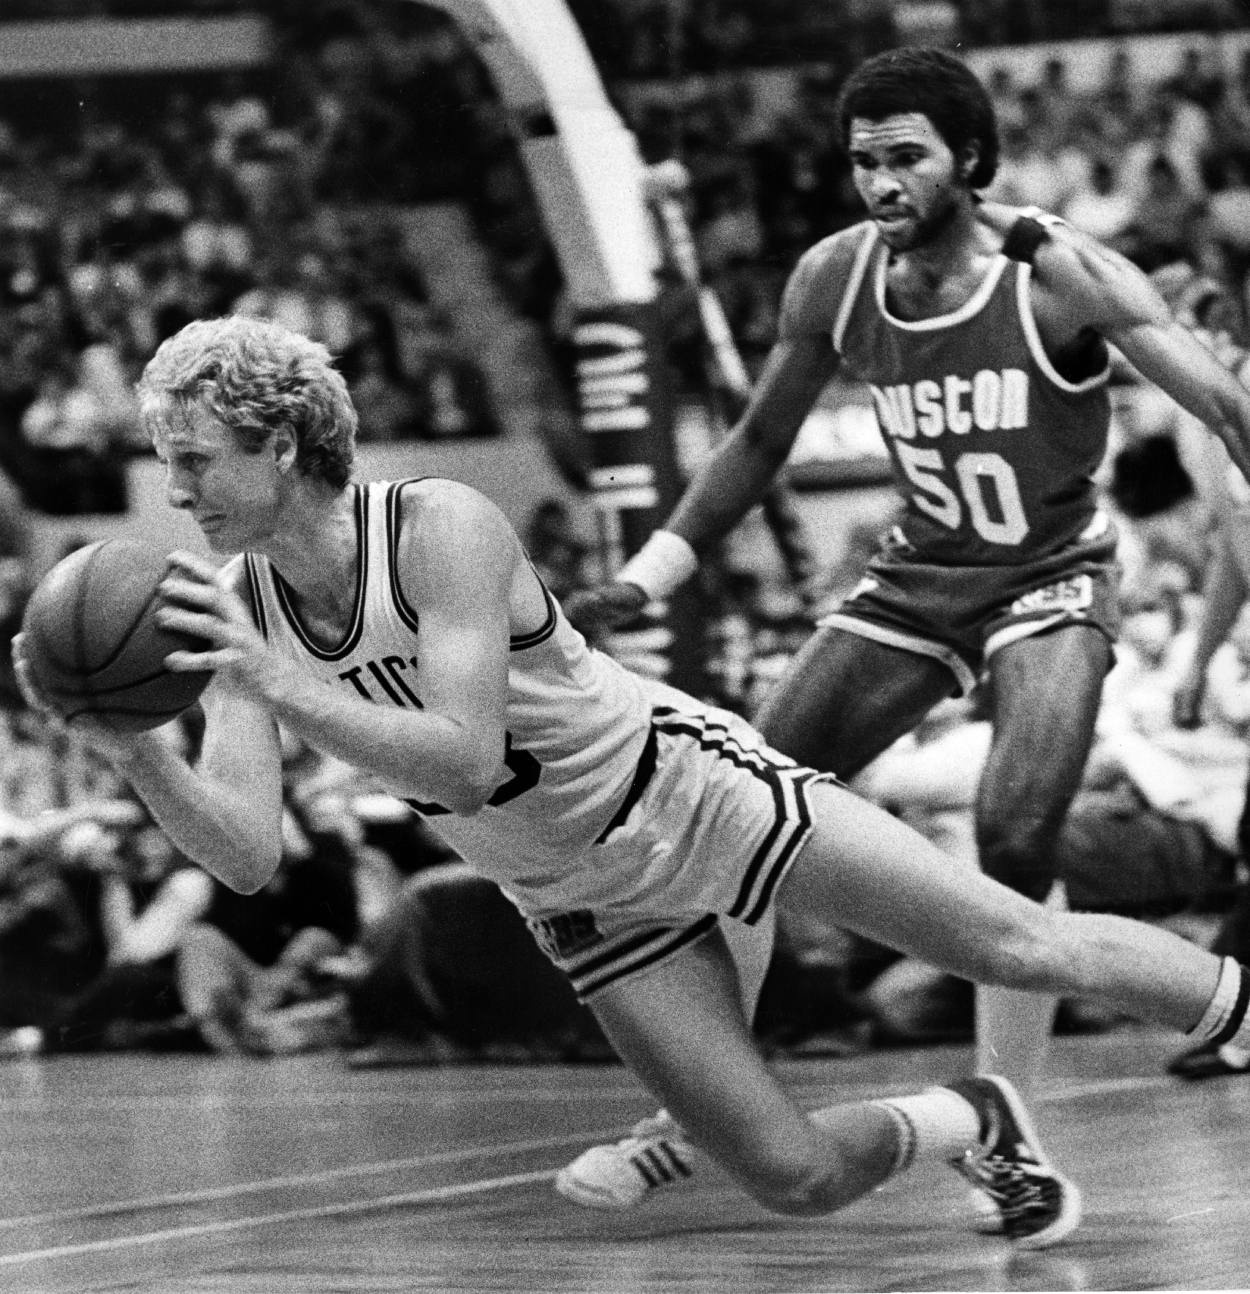 Boston Celtics star Larry Bird, left, can't get a shot off while falling as Houston Rockets player Robert Reid comes in from behind.